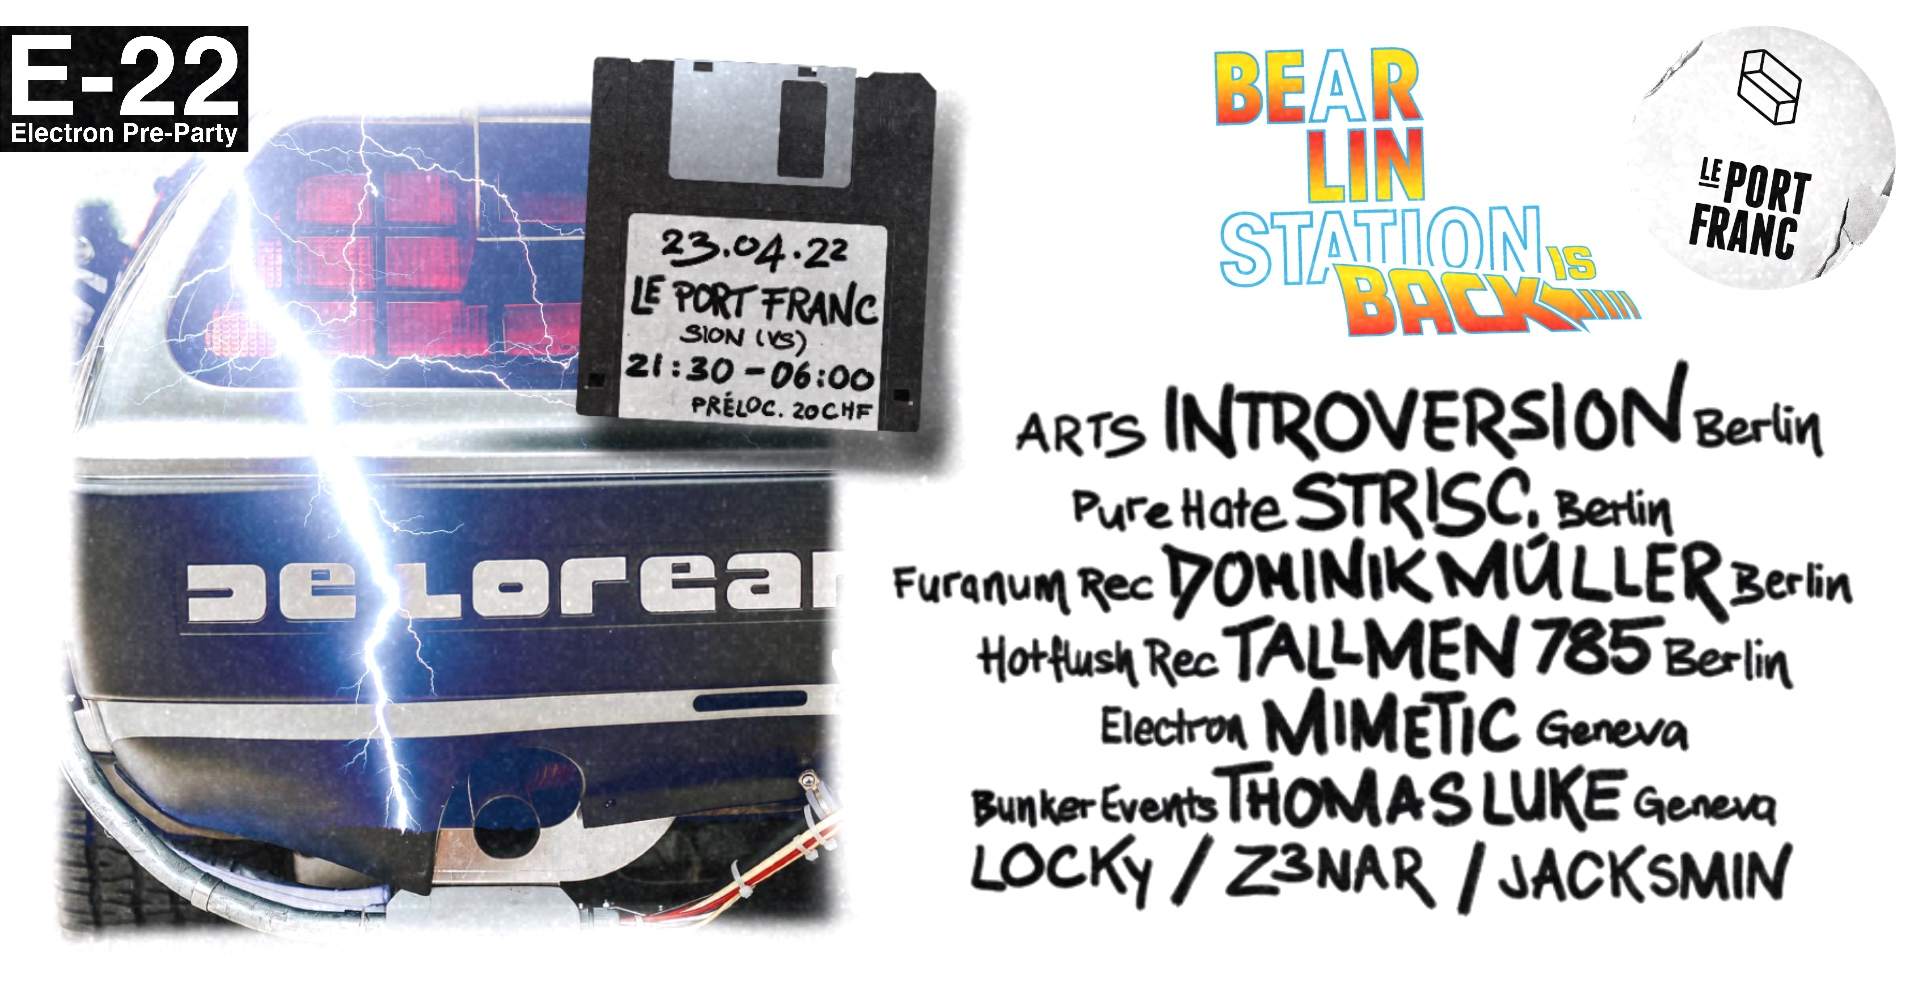 BEAR'LIN STATION IS BACK, powered by ELECTRON FESTIVAL x Le Port Franc - Página frontal